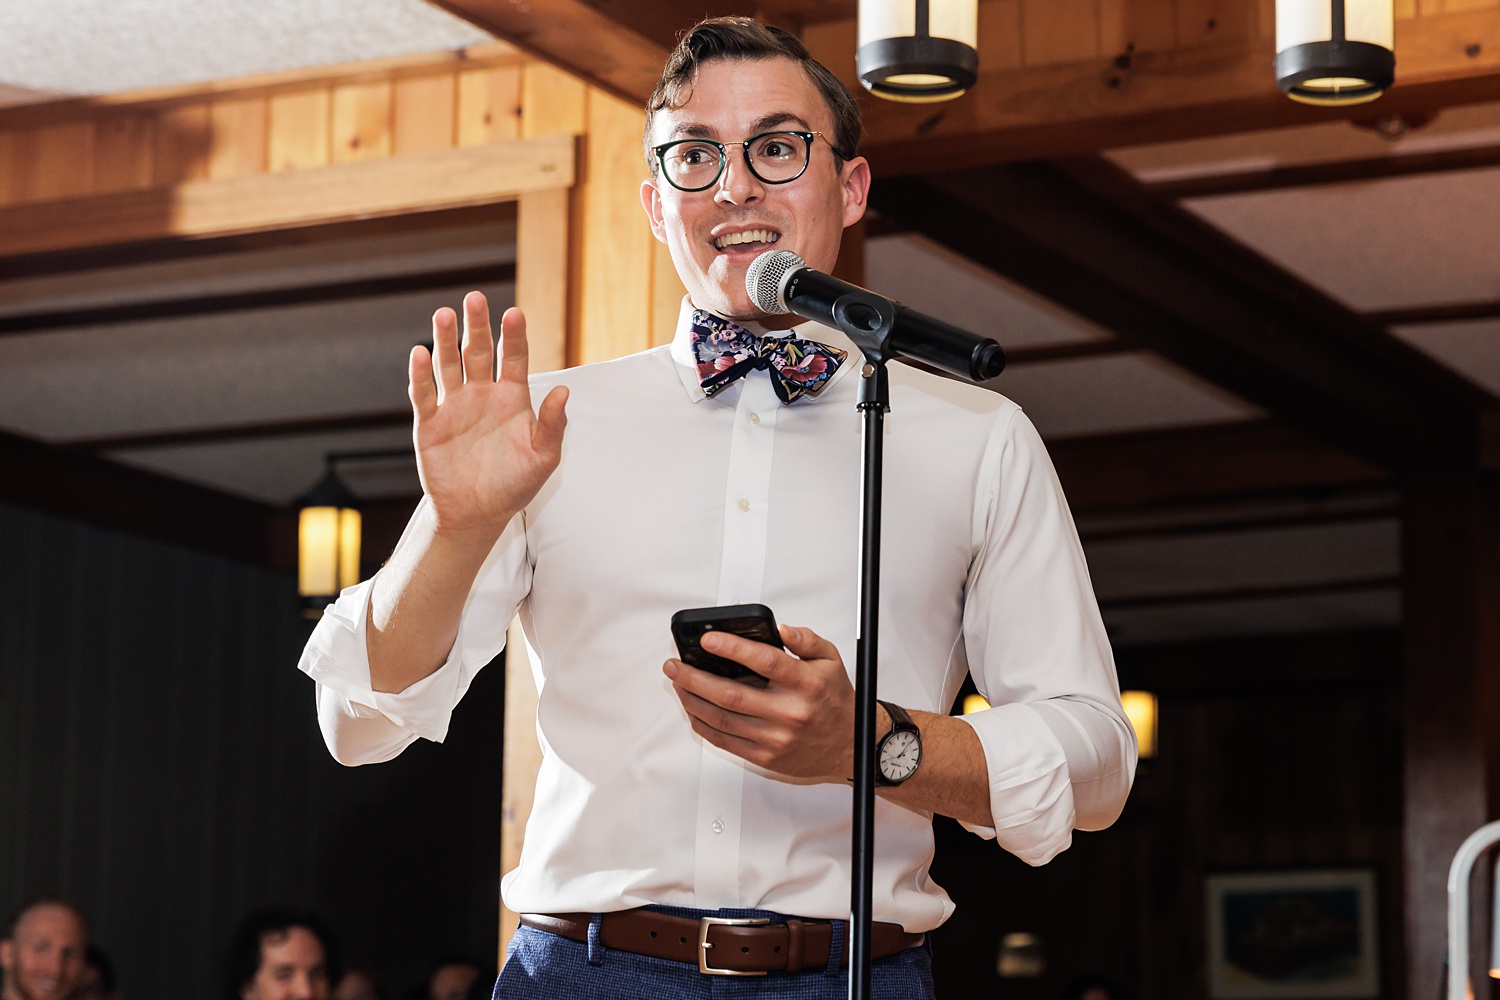 Groomsman gives an emotional toast at the wedding reception